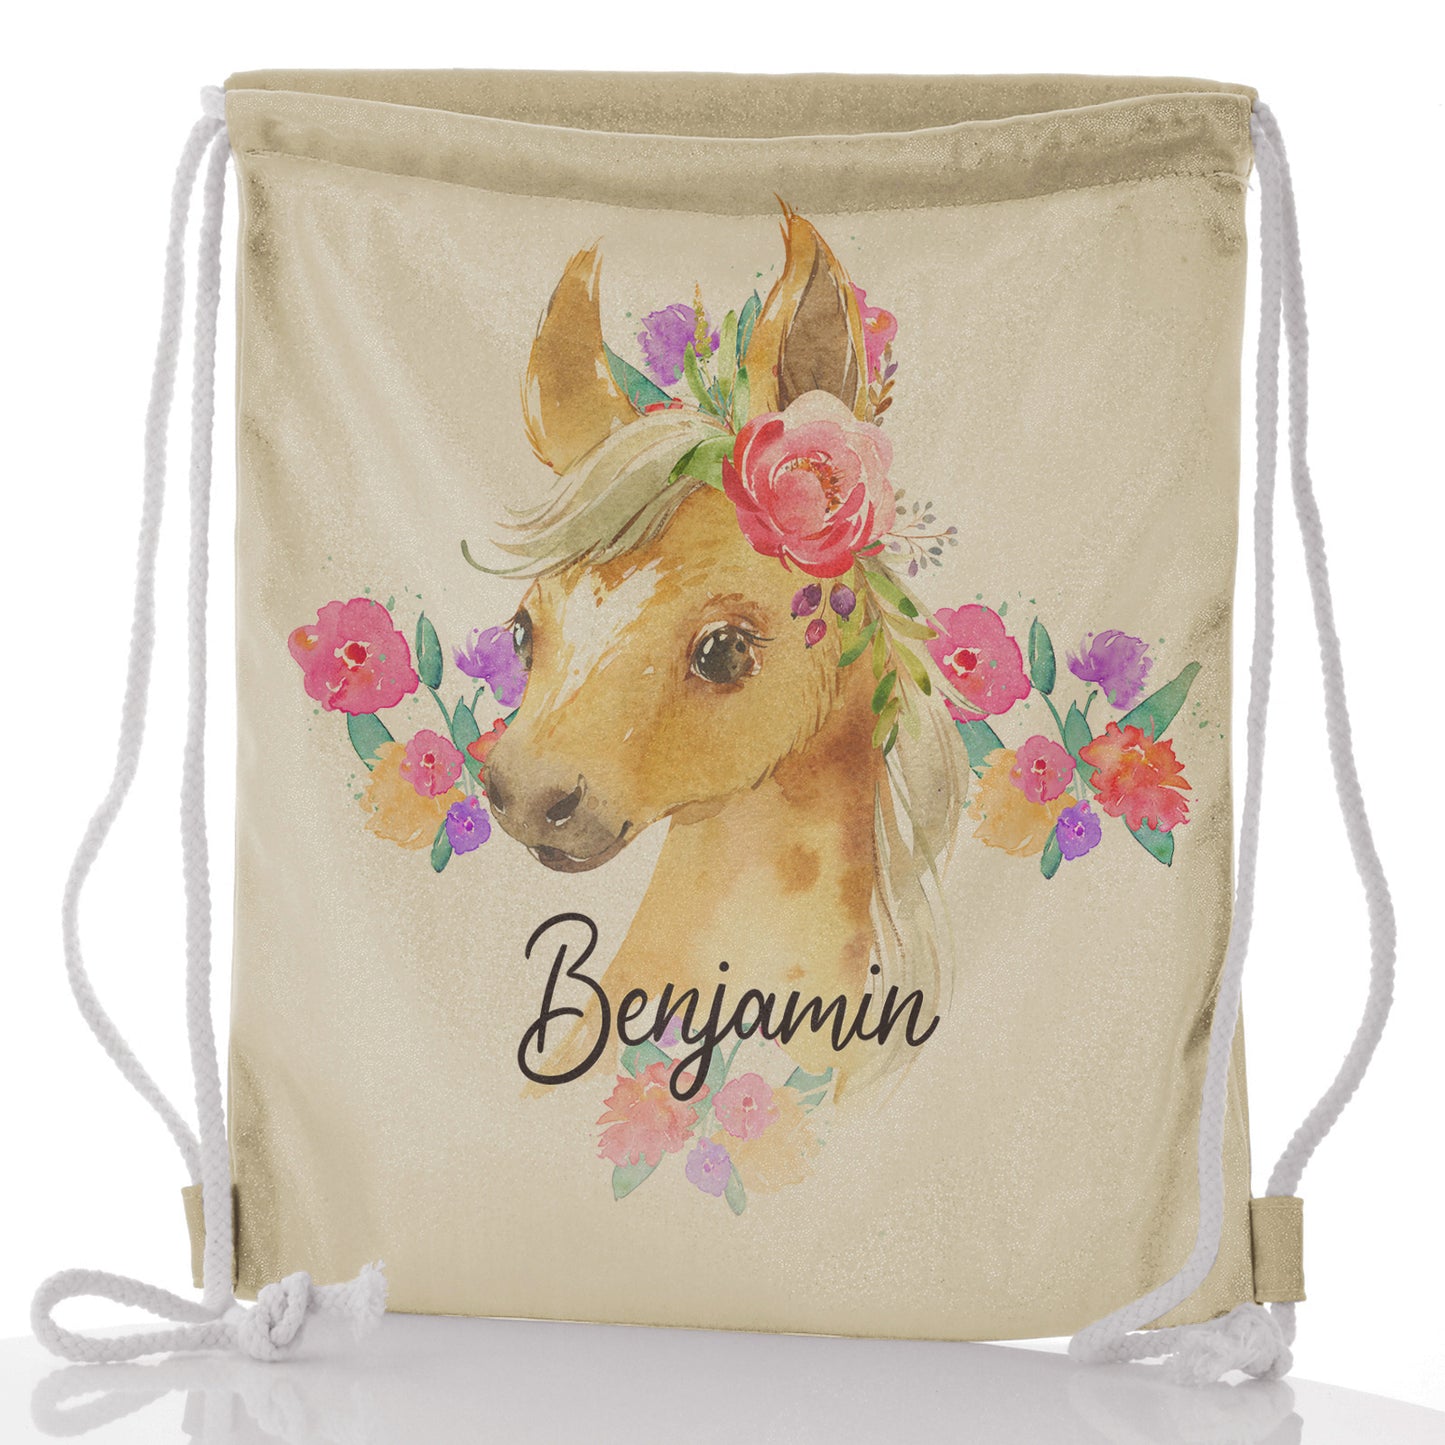 Personalised Glitter Drawstring Backpack with Palomino Horse Multicolour Flower Print and Cute Text